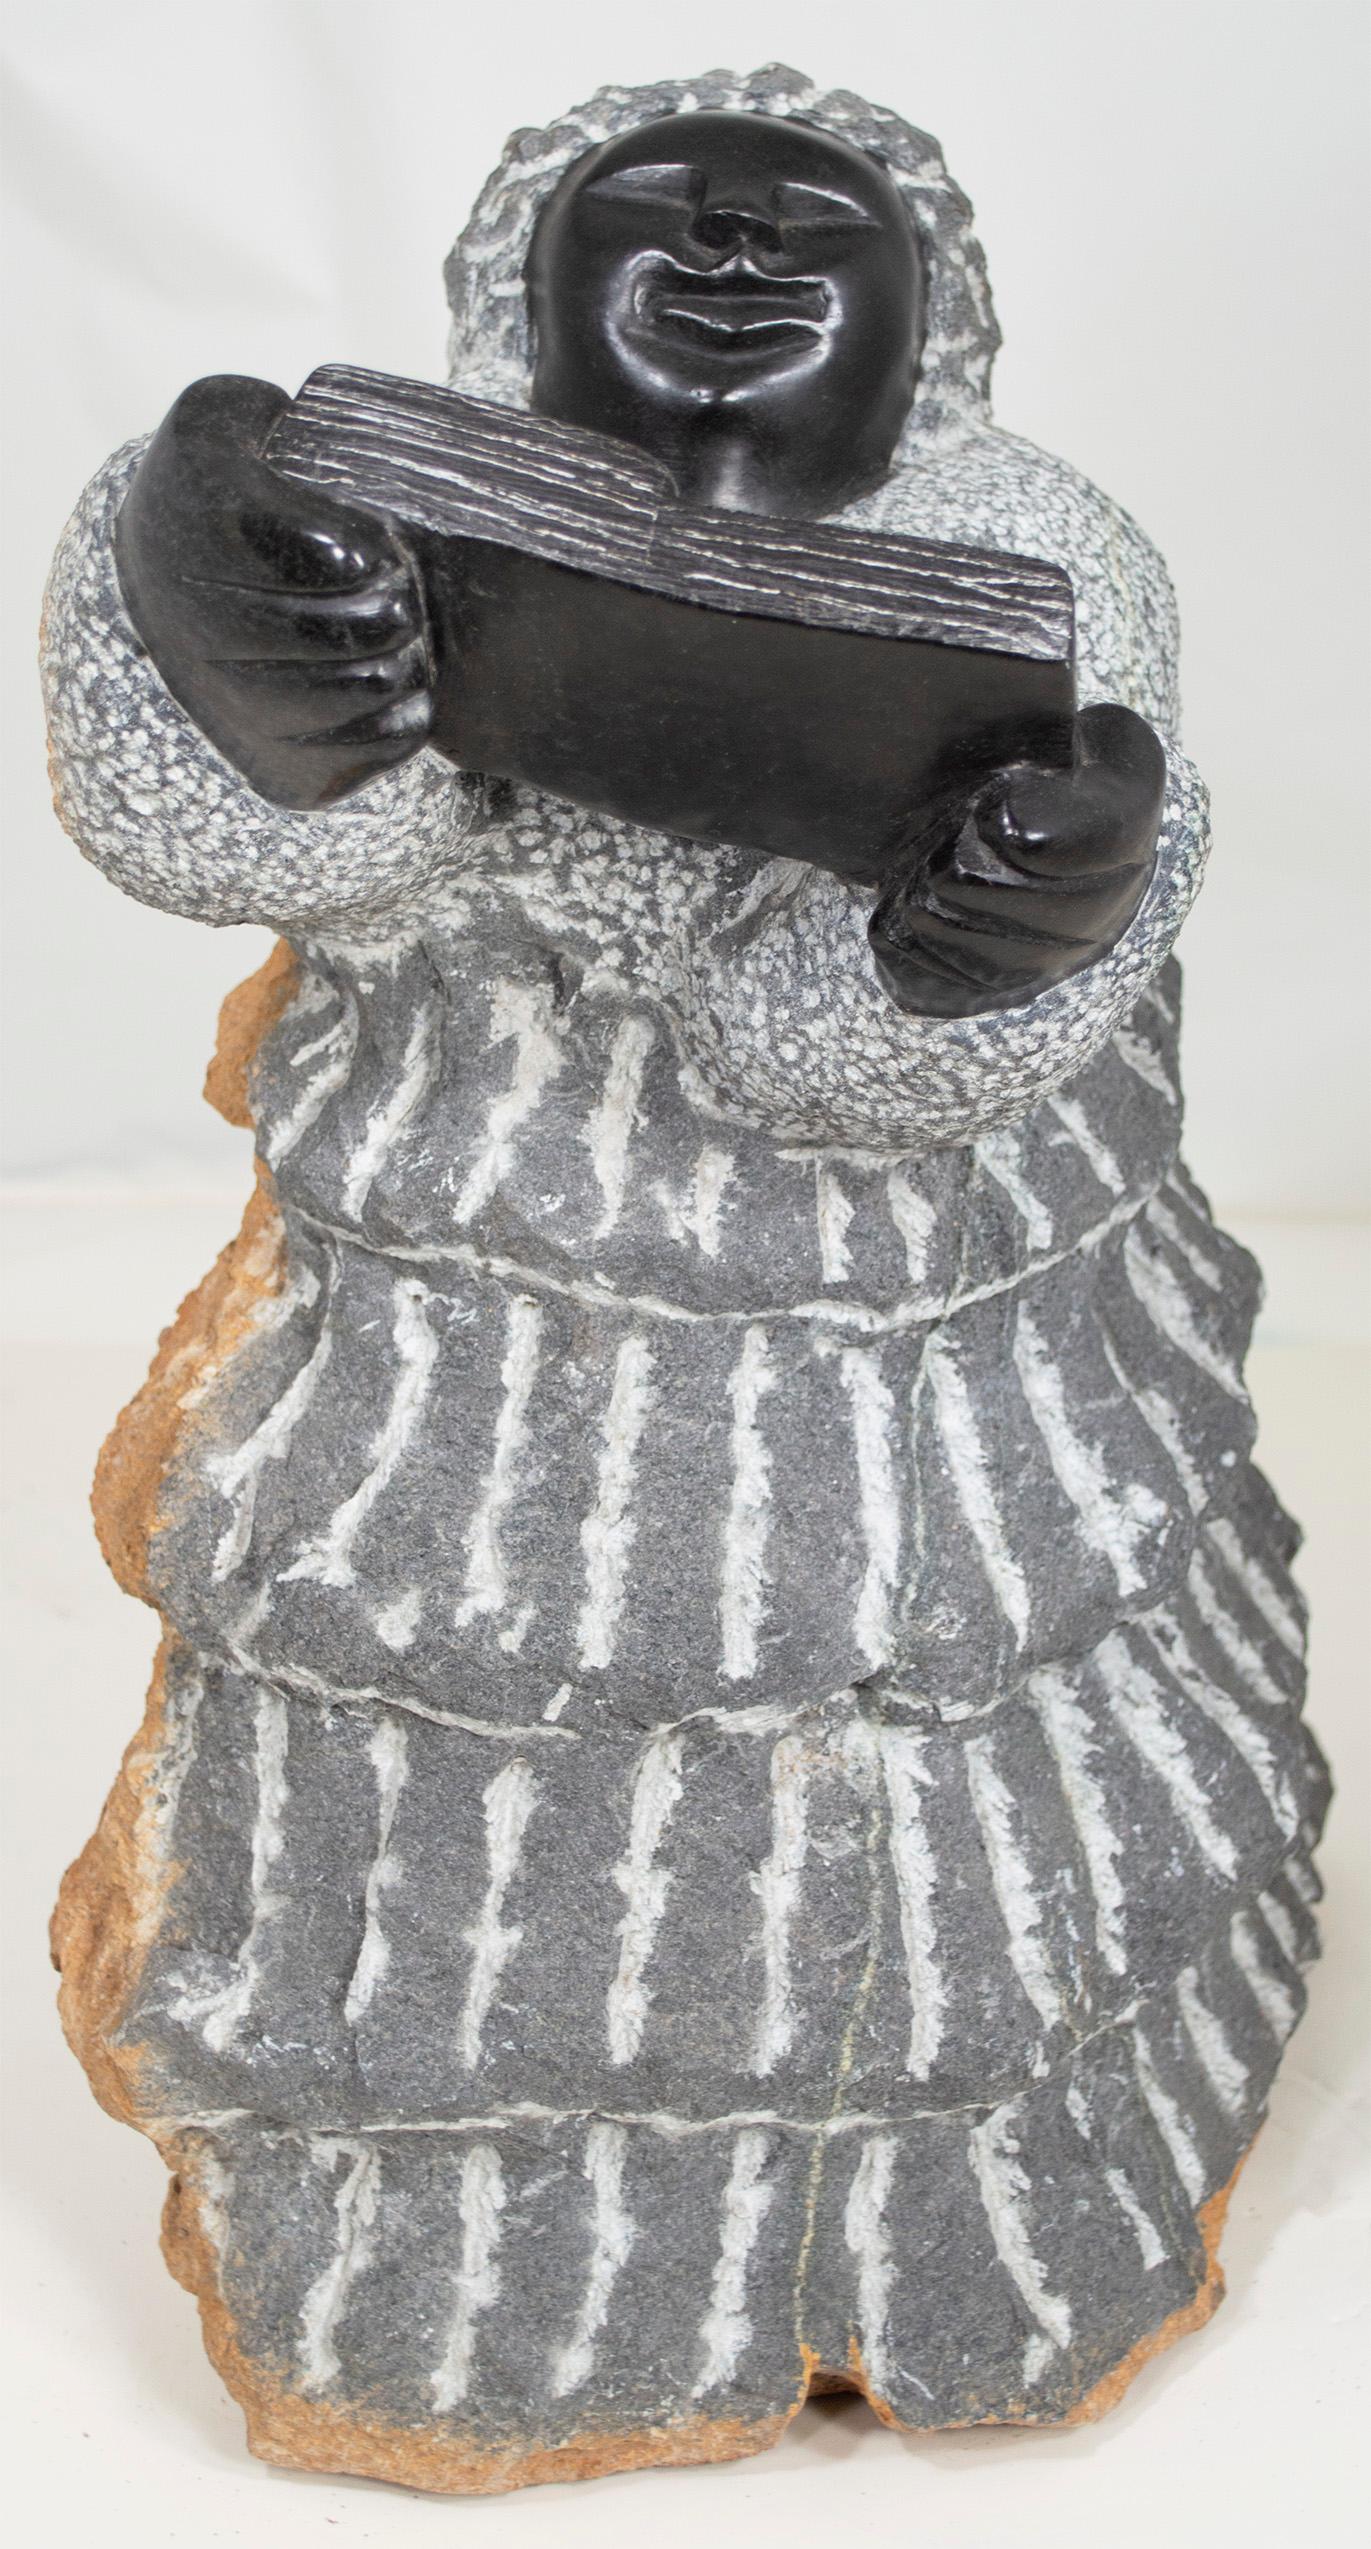 'Teacher or Preacher' is an original black serpentine sculpture by the celebrated second generation Shona artist Colleen Madamombe. The sculpture presents a character common to Madamombe's work: a woman with a round face and wearing a billowing,